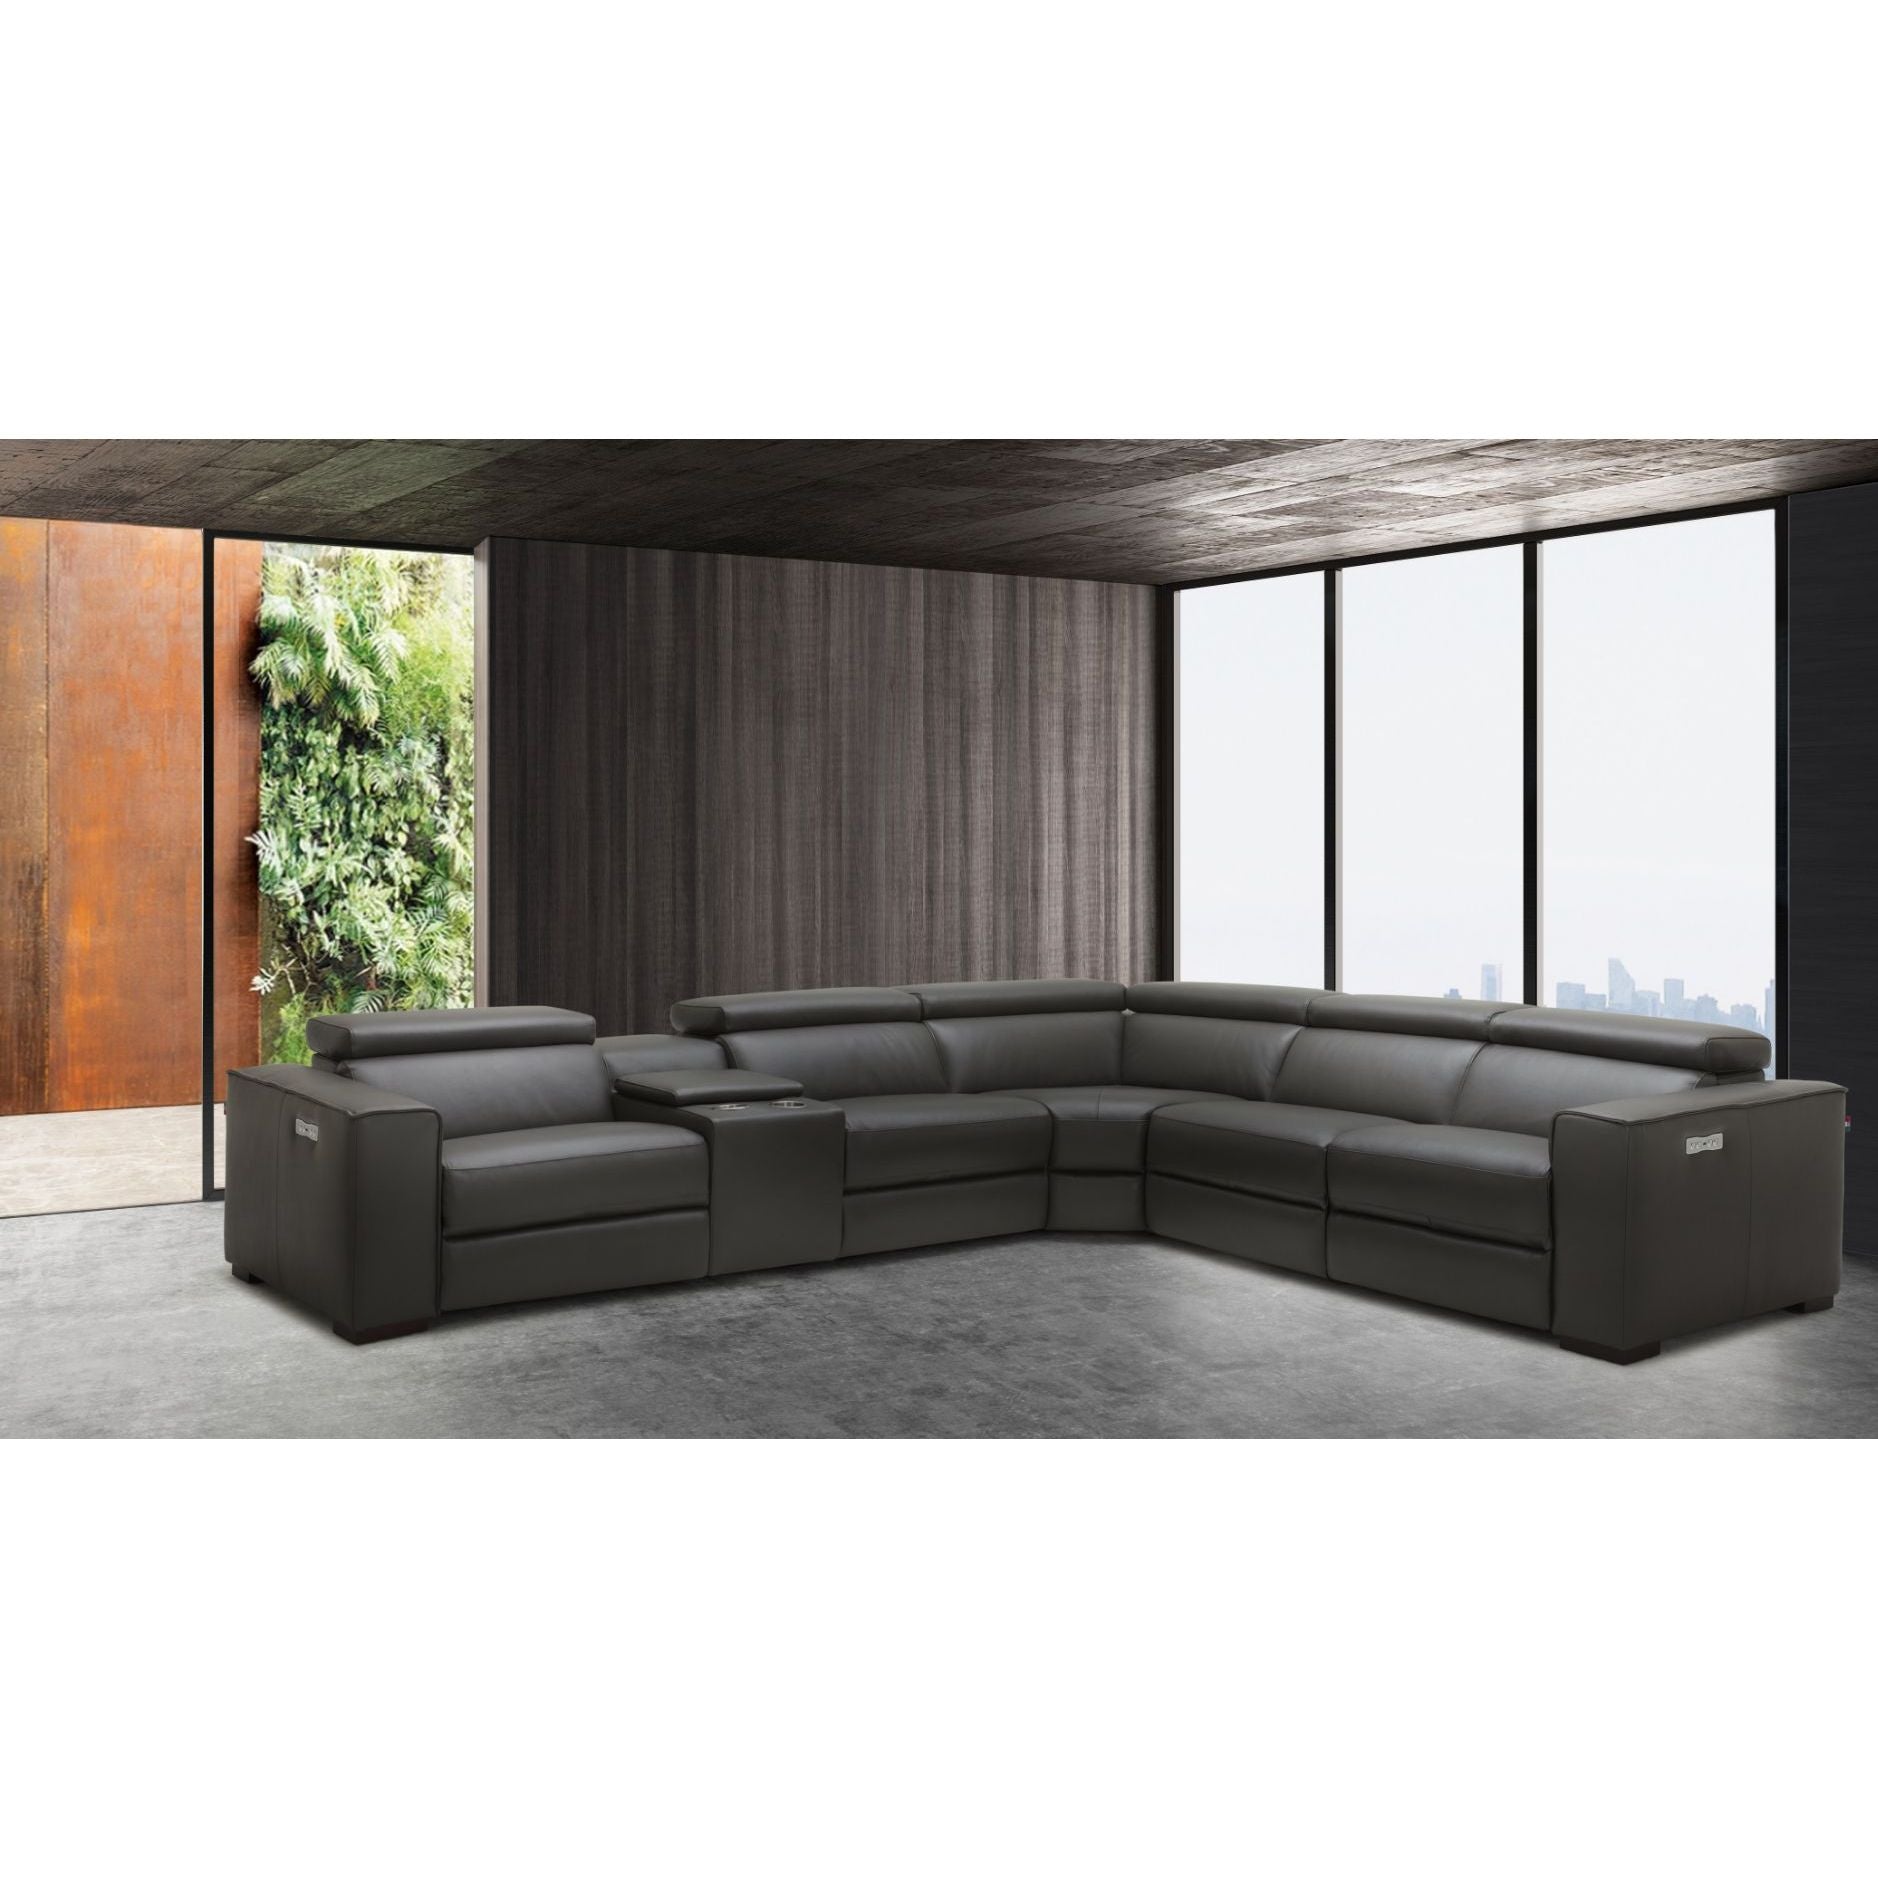 Picasso Motion Sectional in Dark Grey jnmfurniture Sectionals 18865-DG